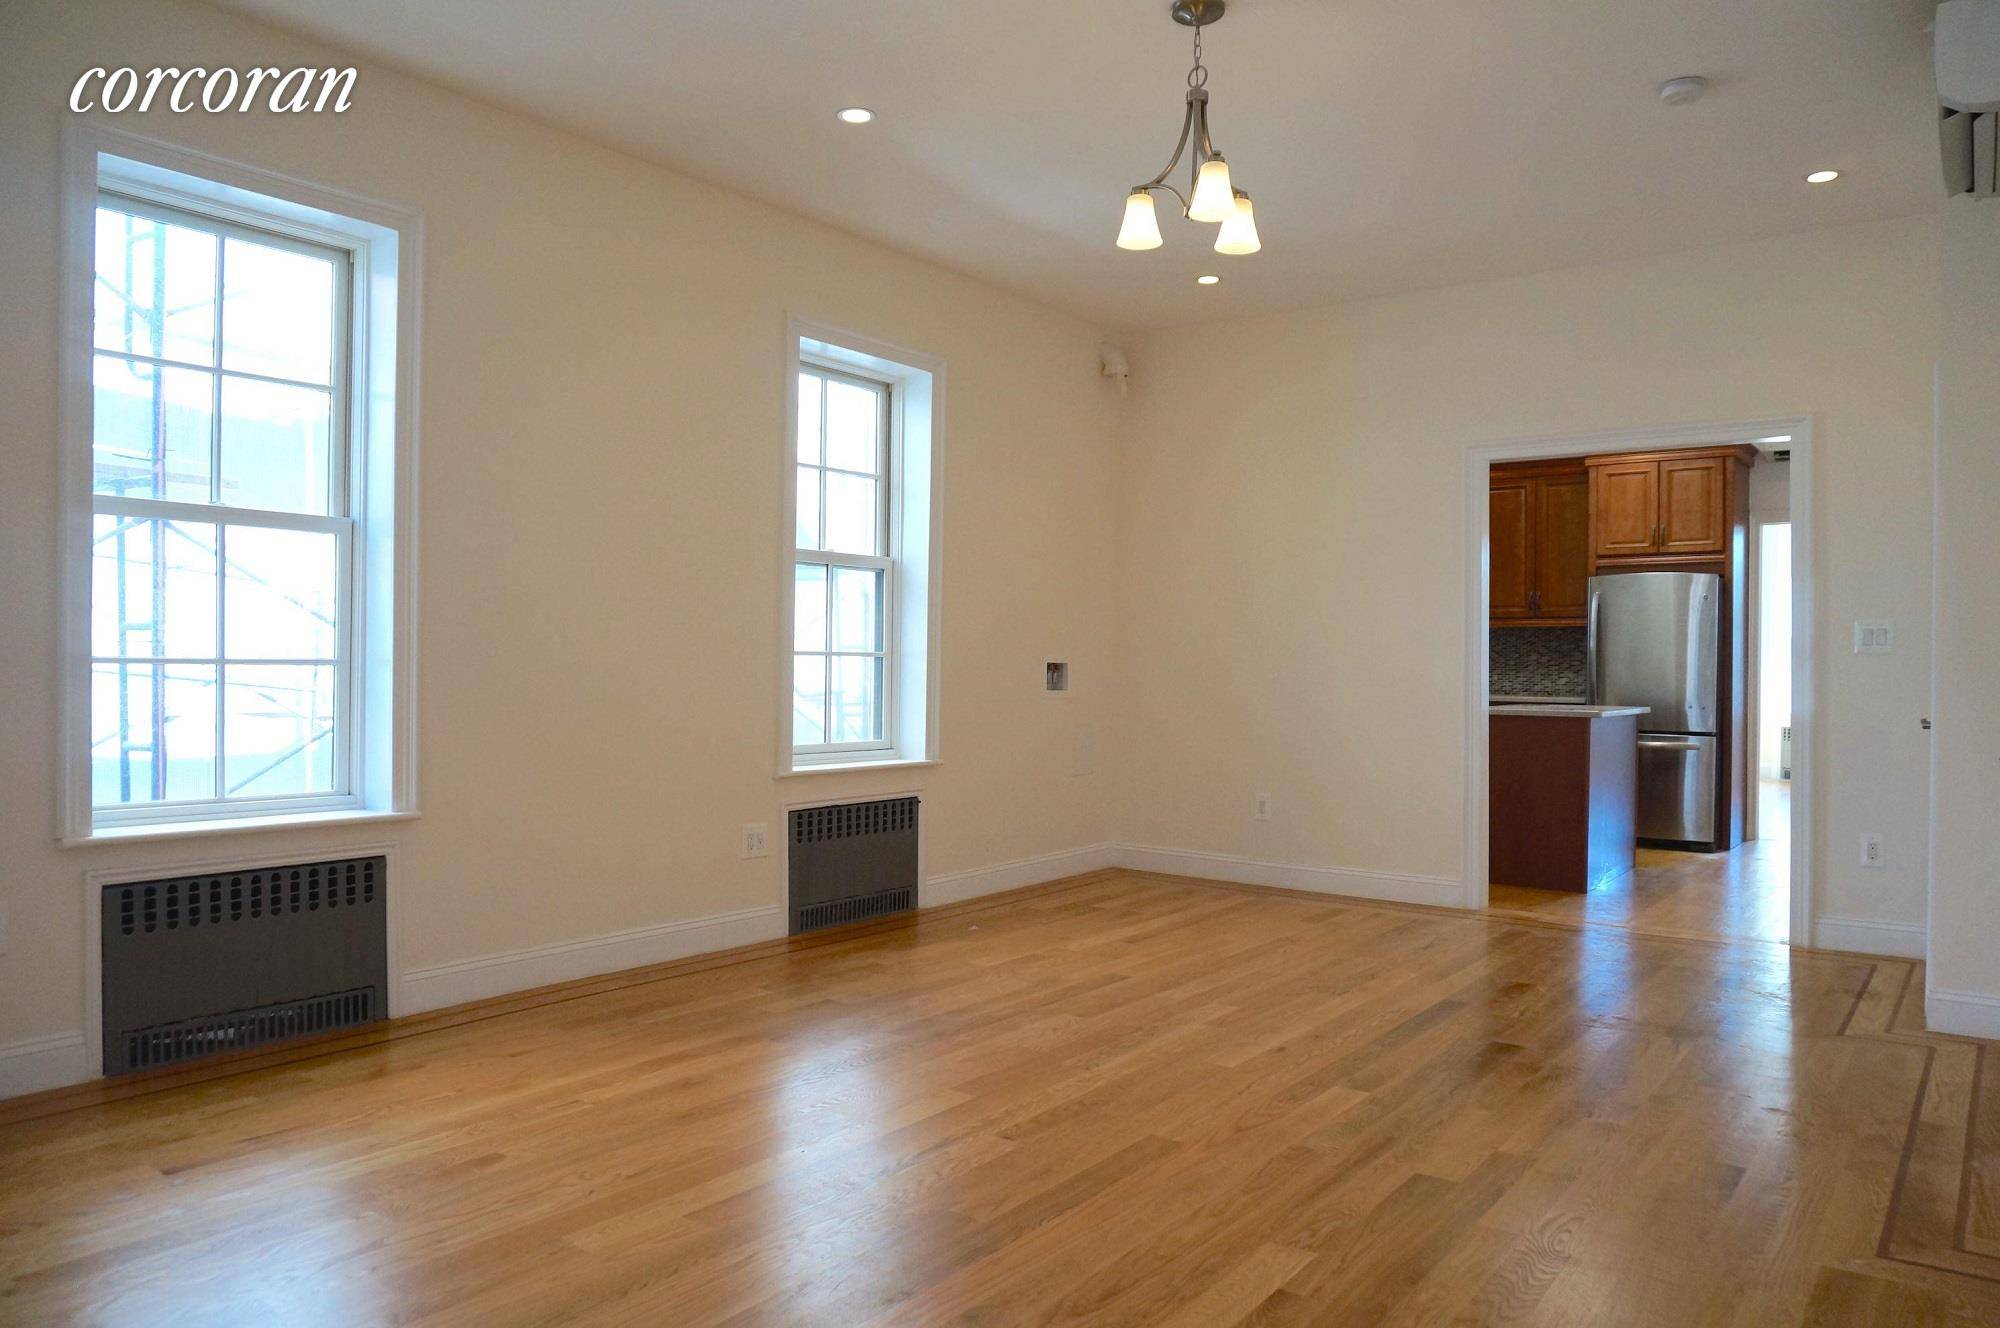 Full Floor renovated three bedroom home in Prospect Lefferts Gardens, one of the hottest neighborhoods in all of Brooklyn !